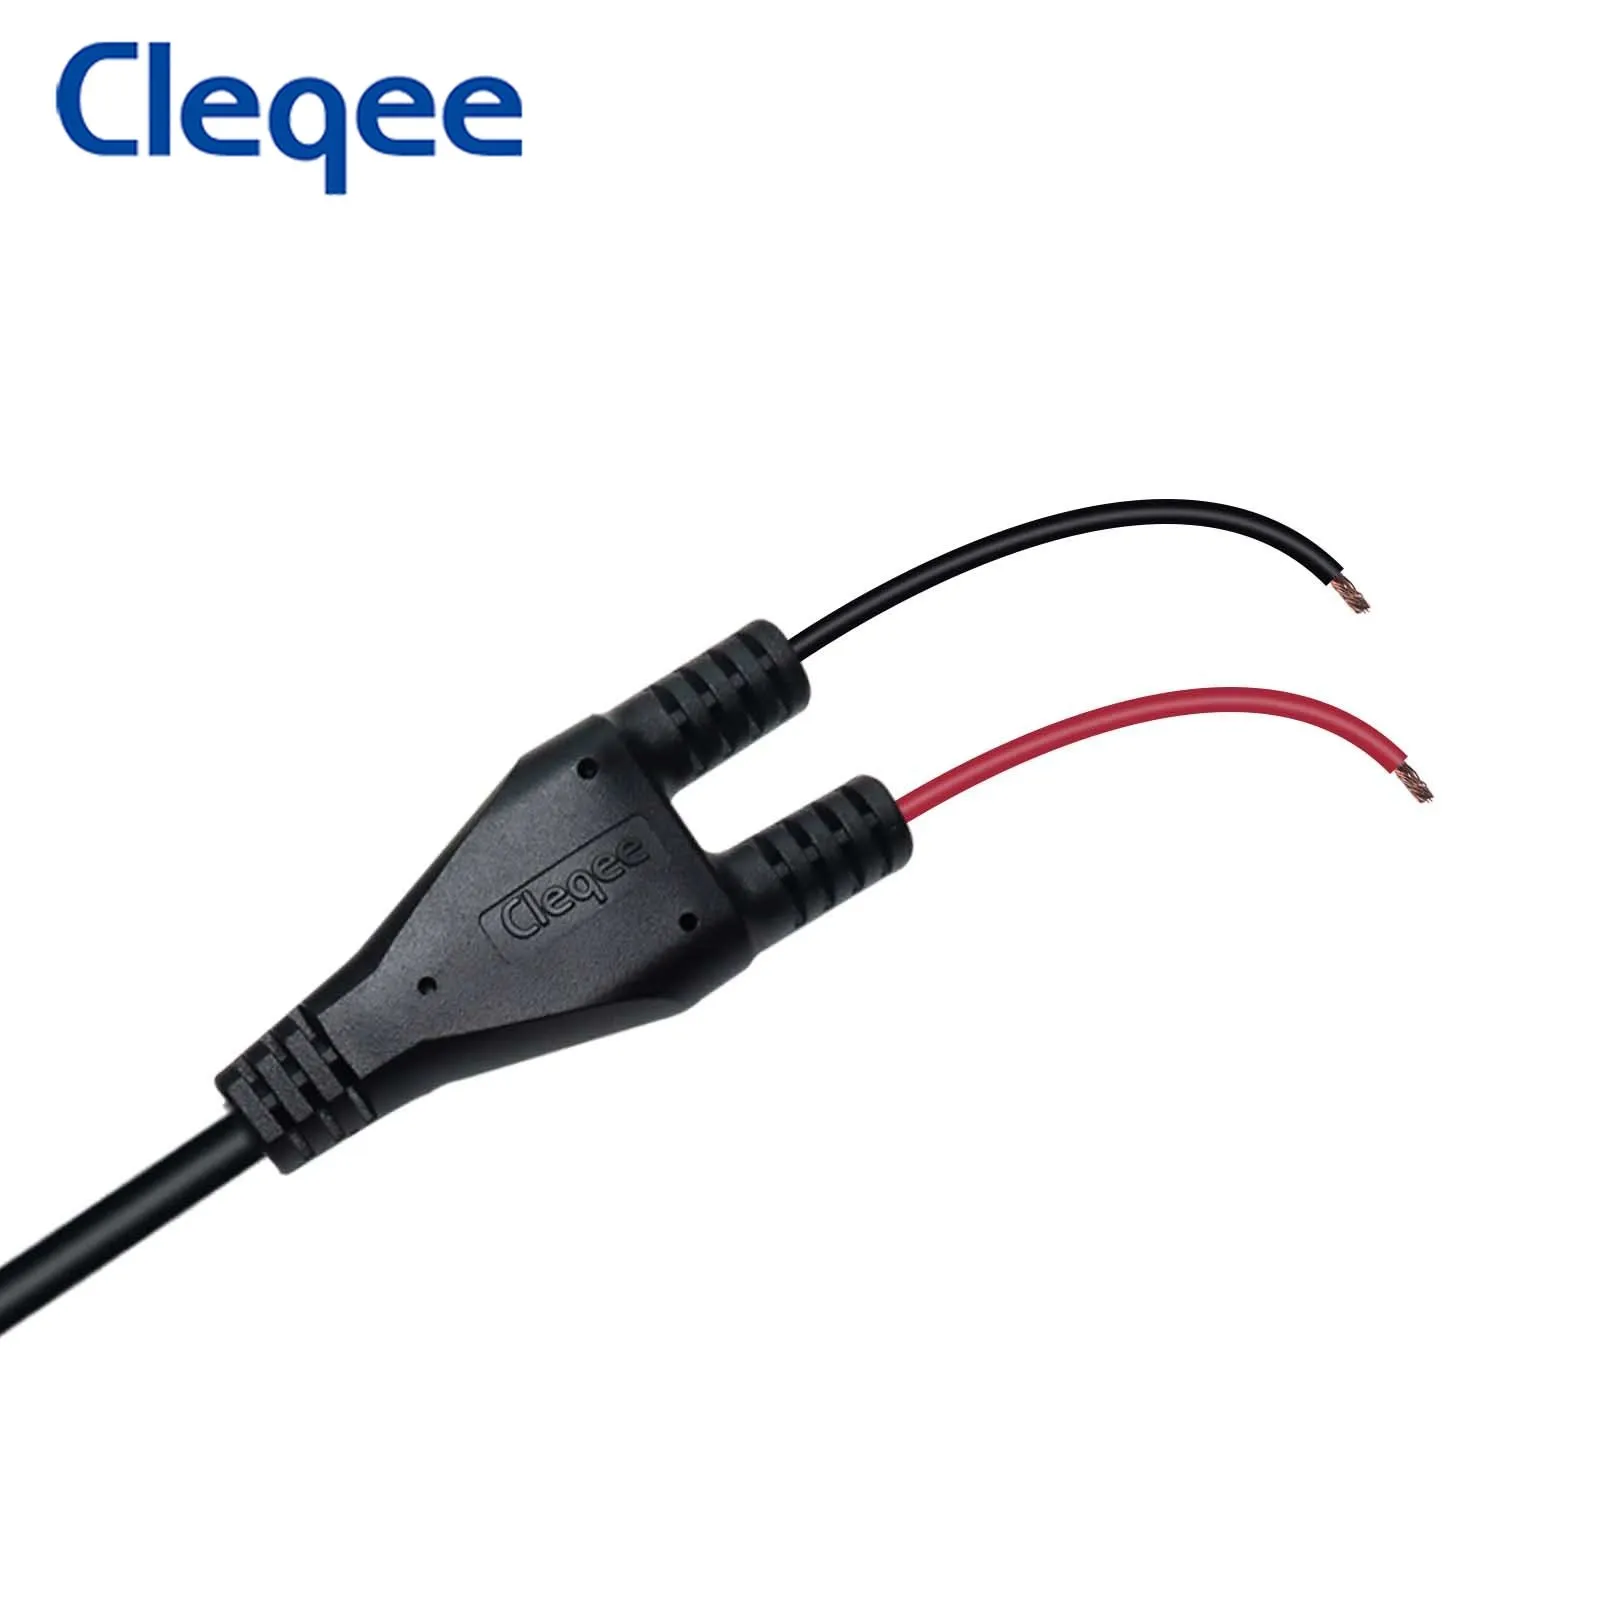 Cleqee P1061 Gold-plated BNC Q9 To Copper Dual Crocodile Alligator Clips Oscilloscope Test Lead 120cm Probe Cable